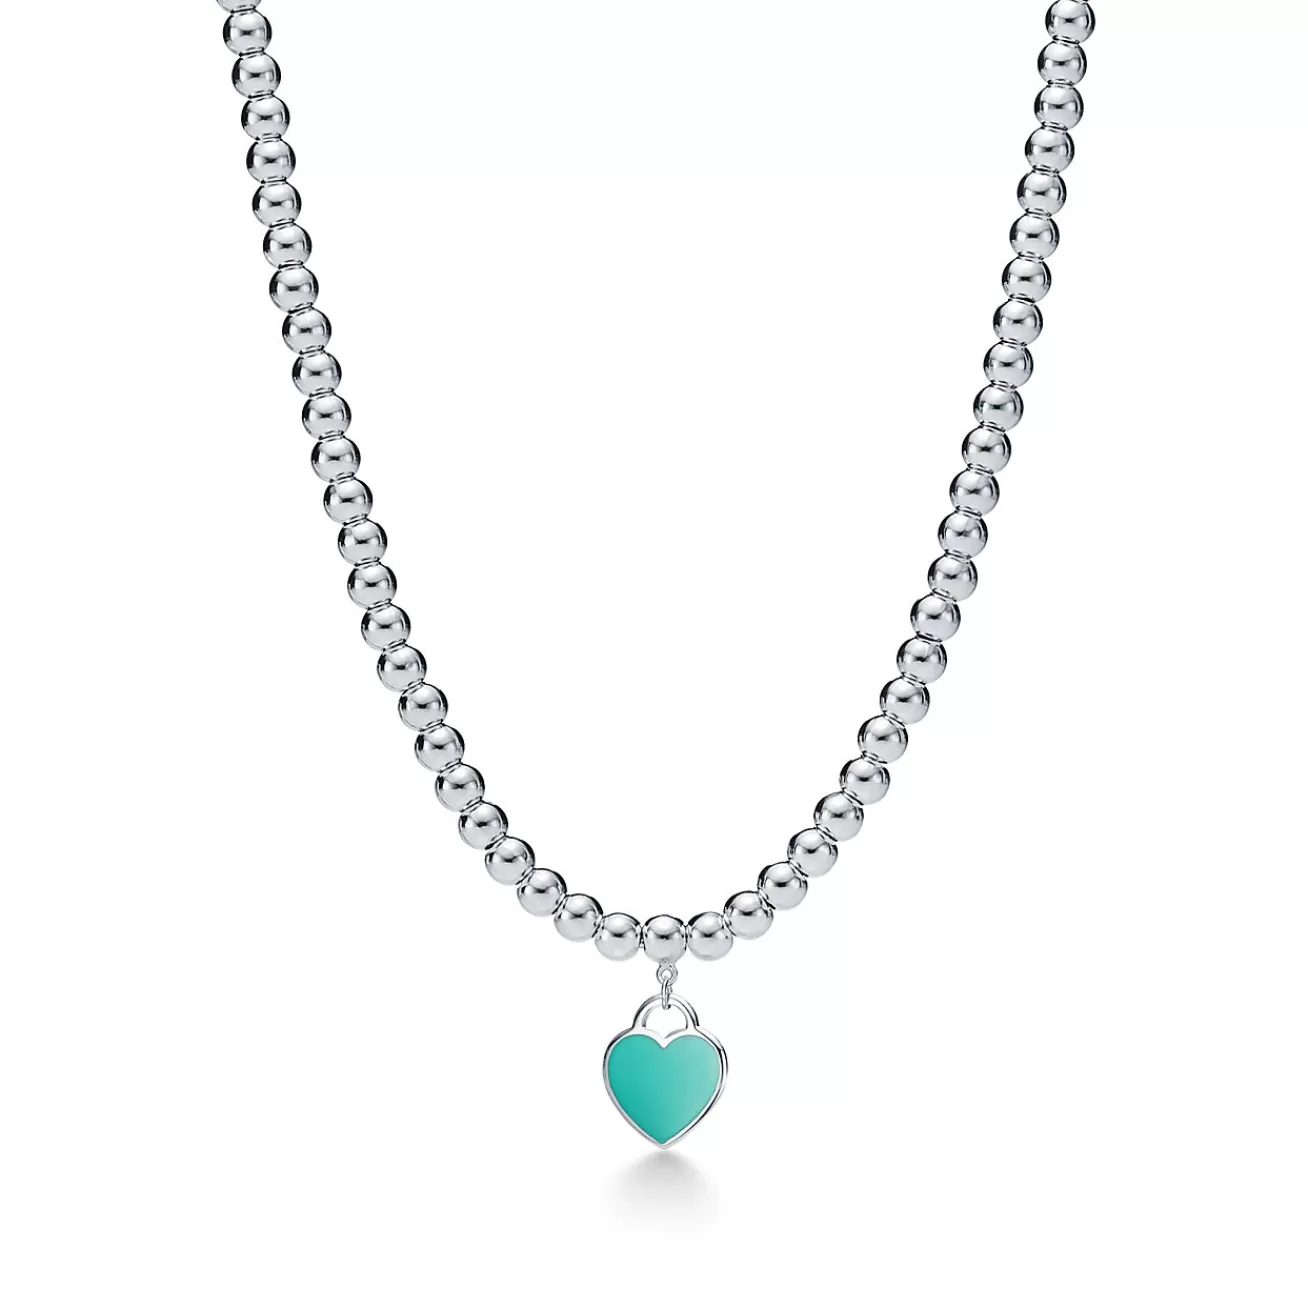 Tiffany & Co. Return to Tiffany® heart tag necklace in sterling silver with enamel finish. | ^ Necklaces & Pendants | Sterling Silver Jewelry